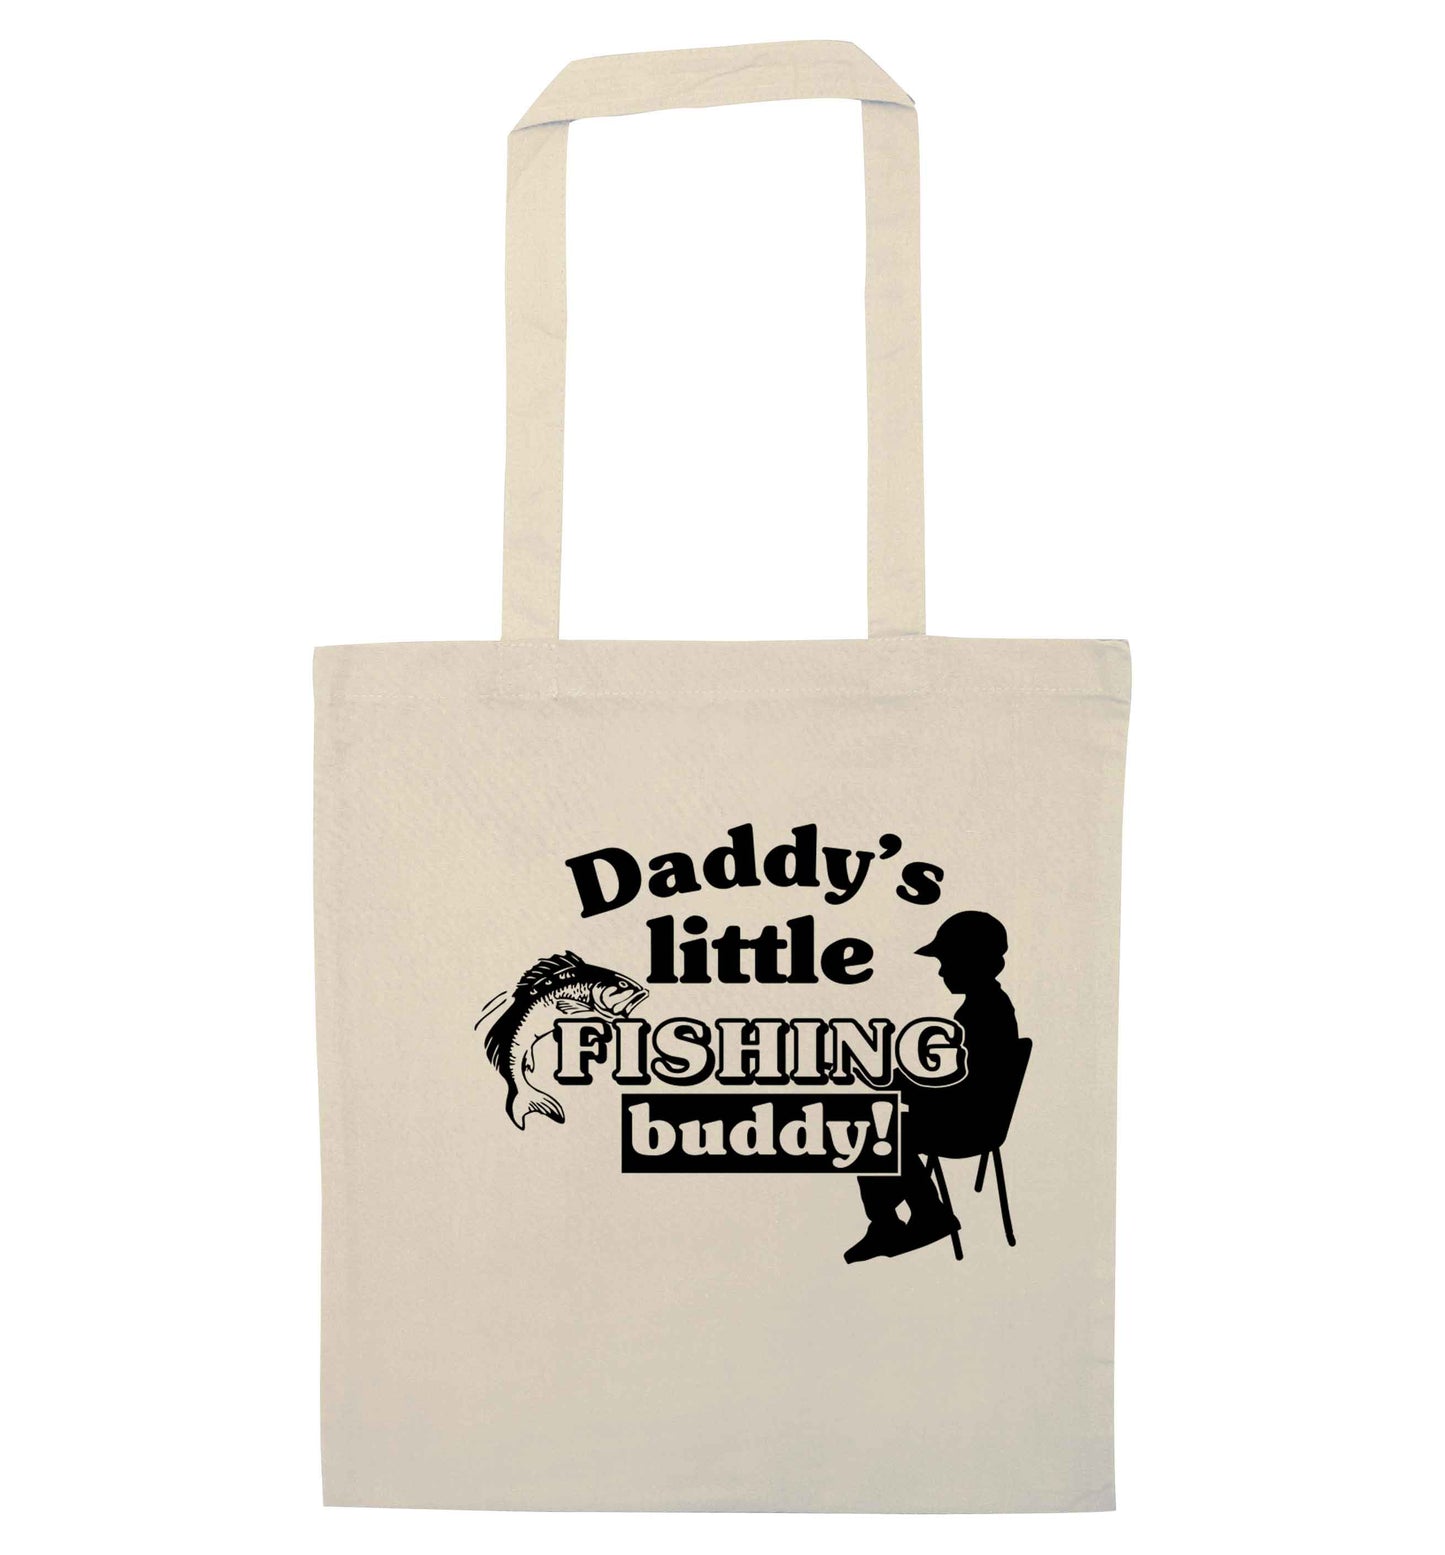 Daddy's little fishing buddy natural tote bag